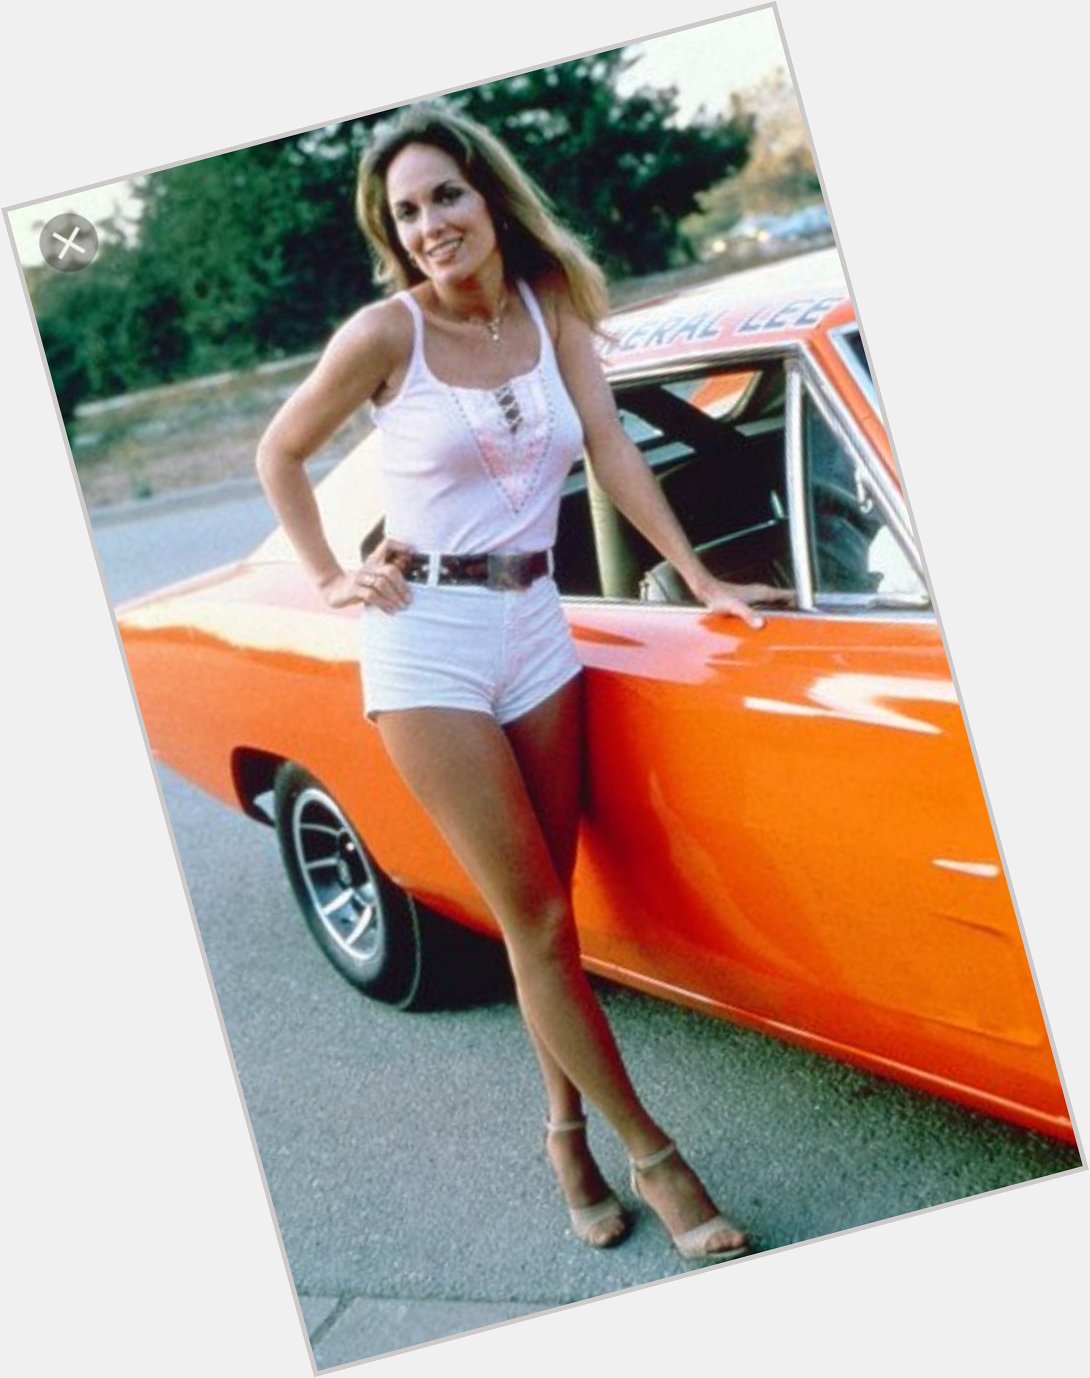 Happy 65th birthday today to Catherine Bach. I used to love Dukes of Hazzard for some reason 